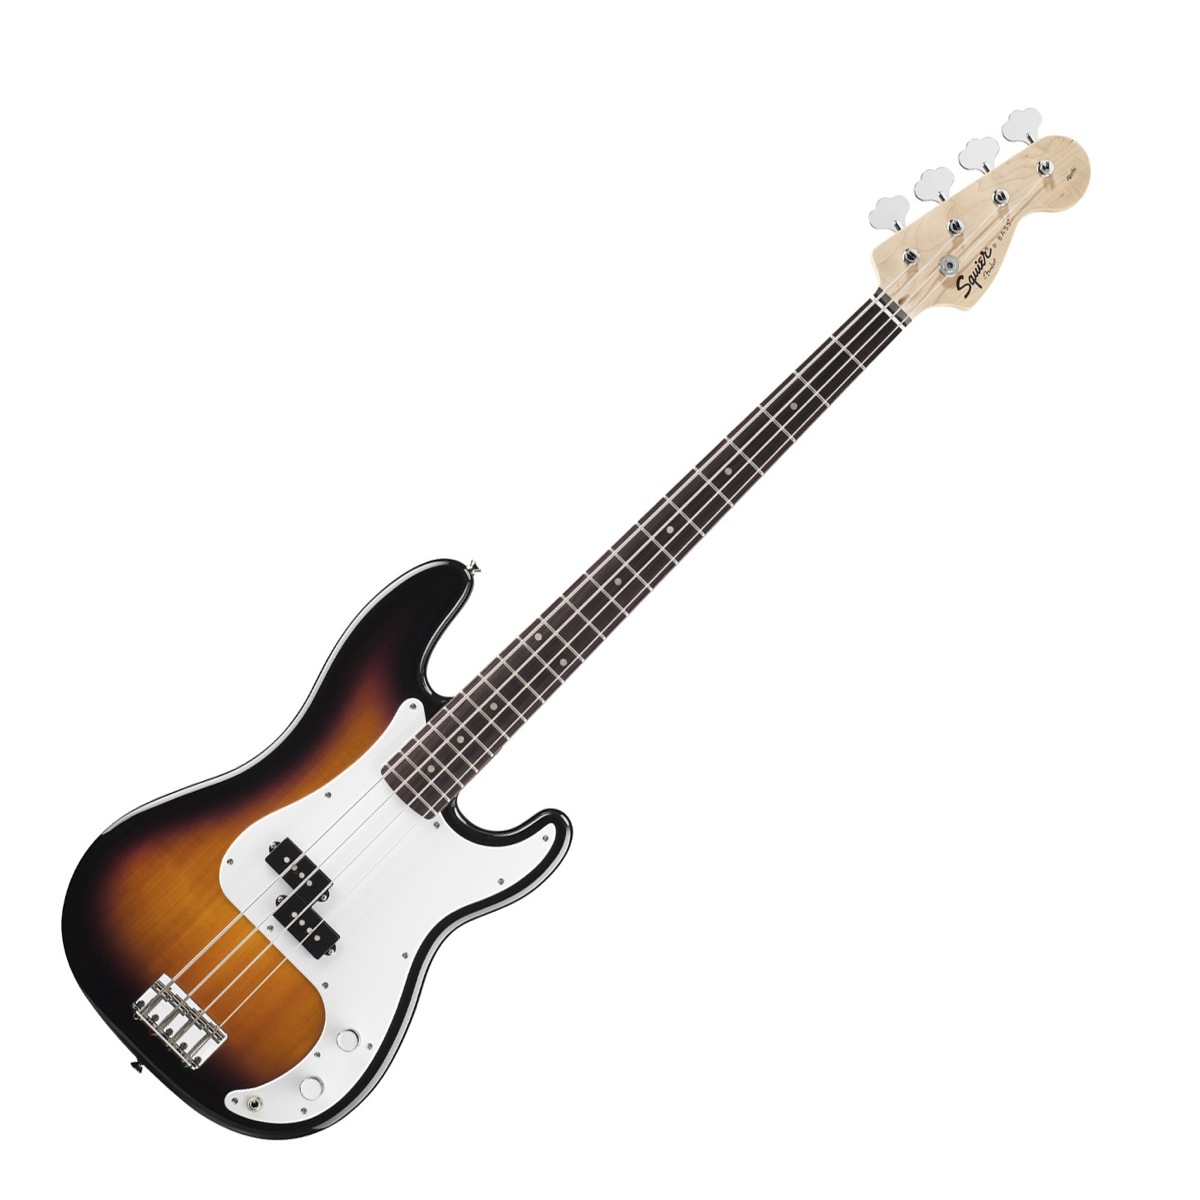 Squier Squier Precision Electric Bass, with Rosewood Neck - Brown Sunburst